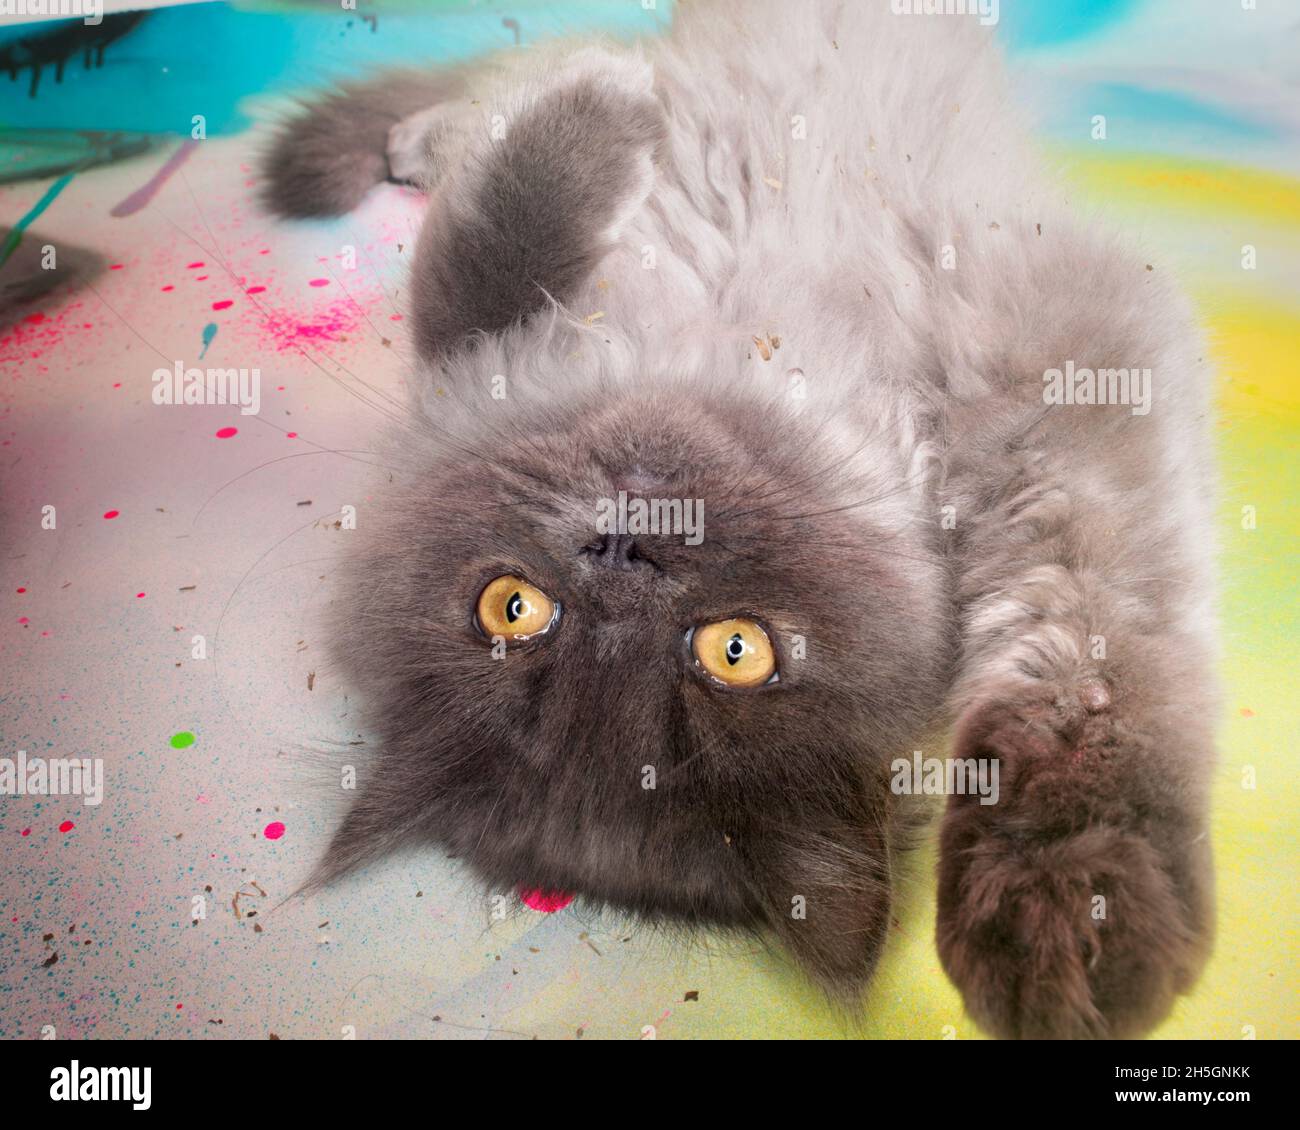 Cute fluffy grey kitten lying on his back reaching towards the camera. Stock Photo